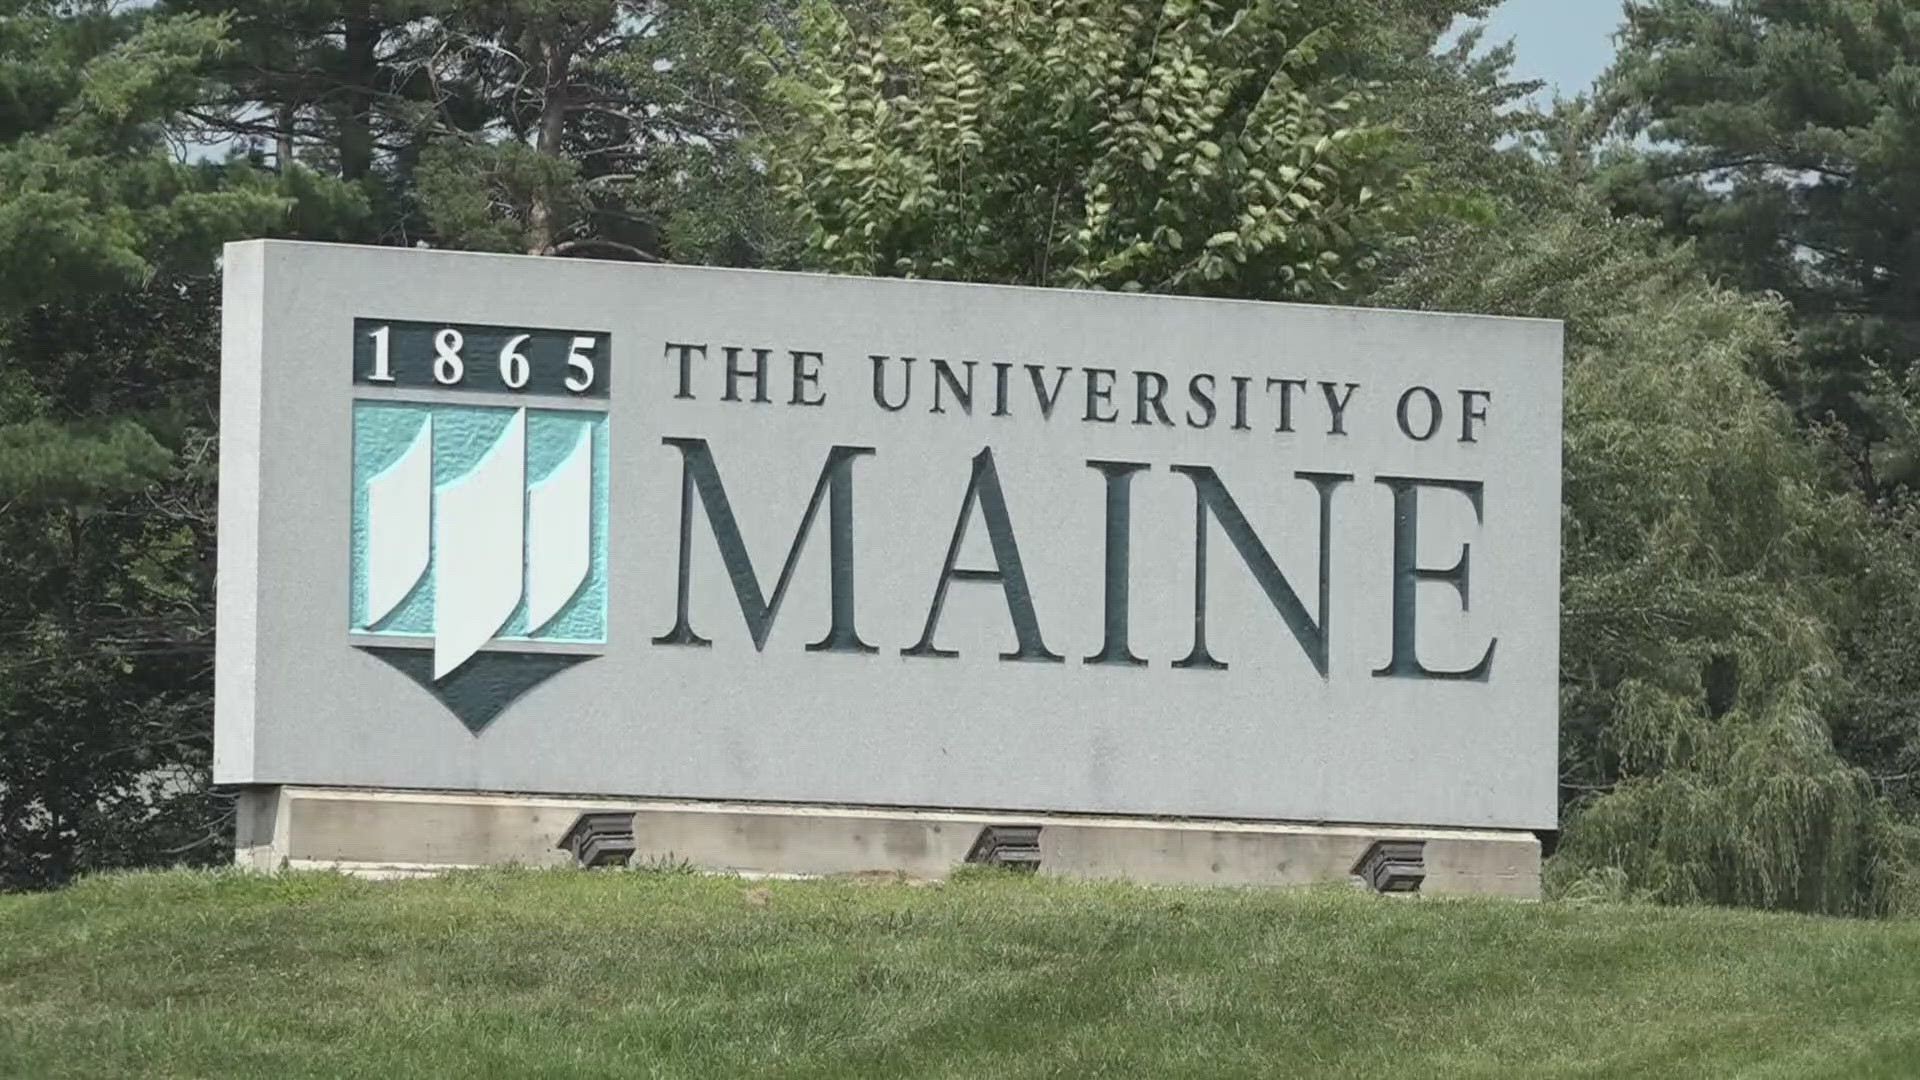 On Tuesday, the Legislature approved funding for a feasibility study to research whether the University of Maine could support the institution.